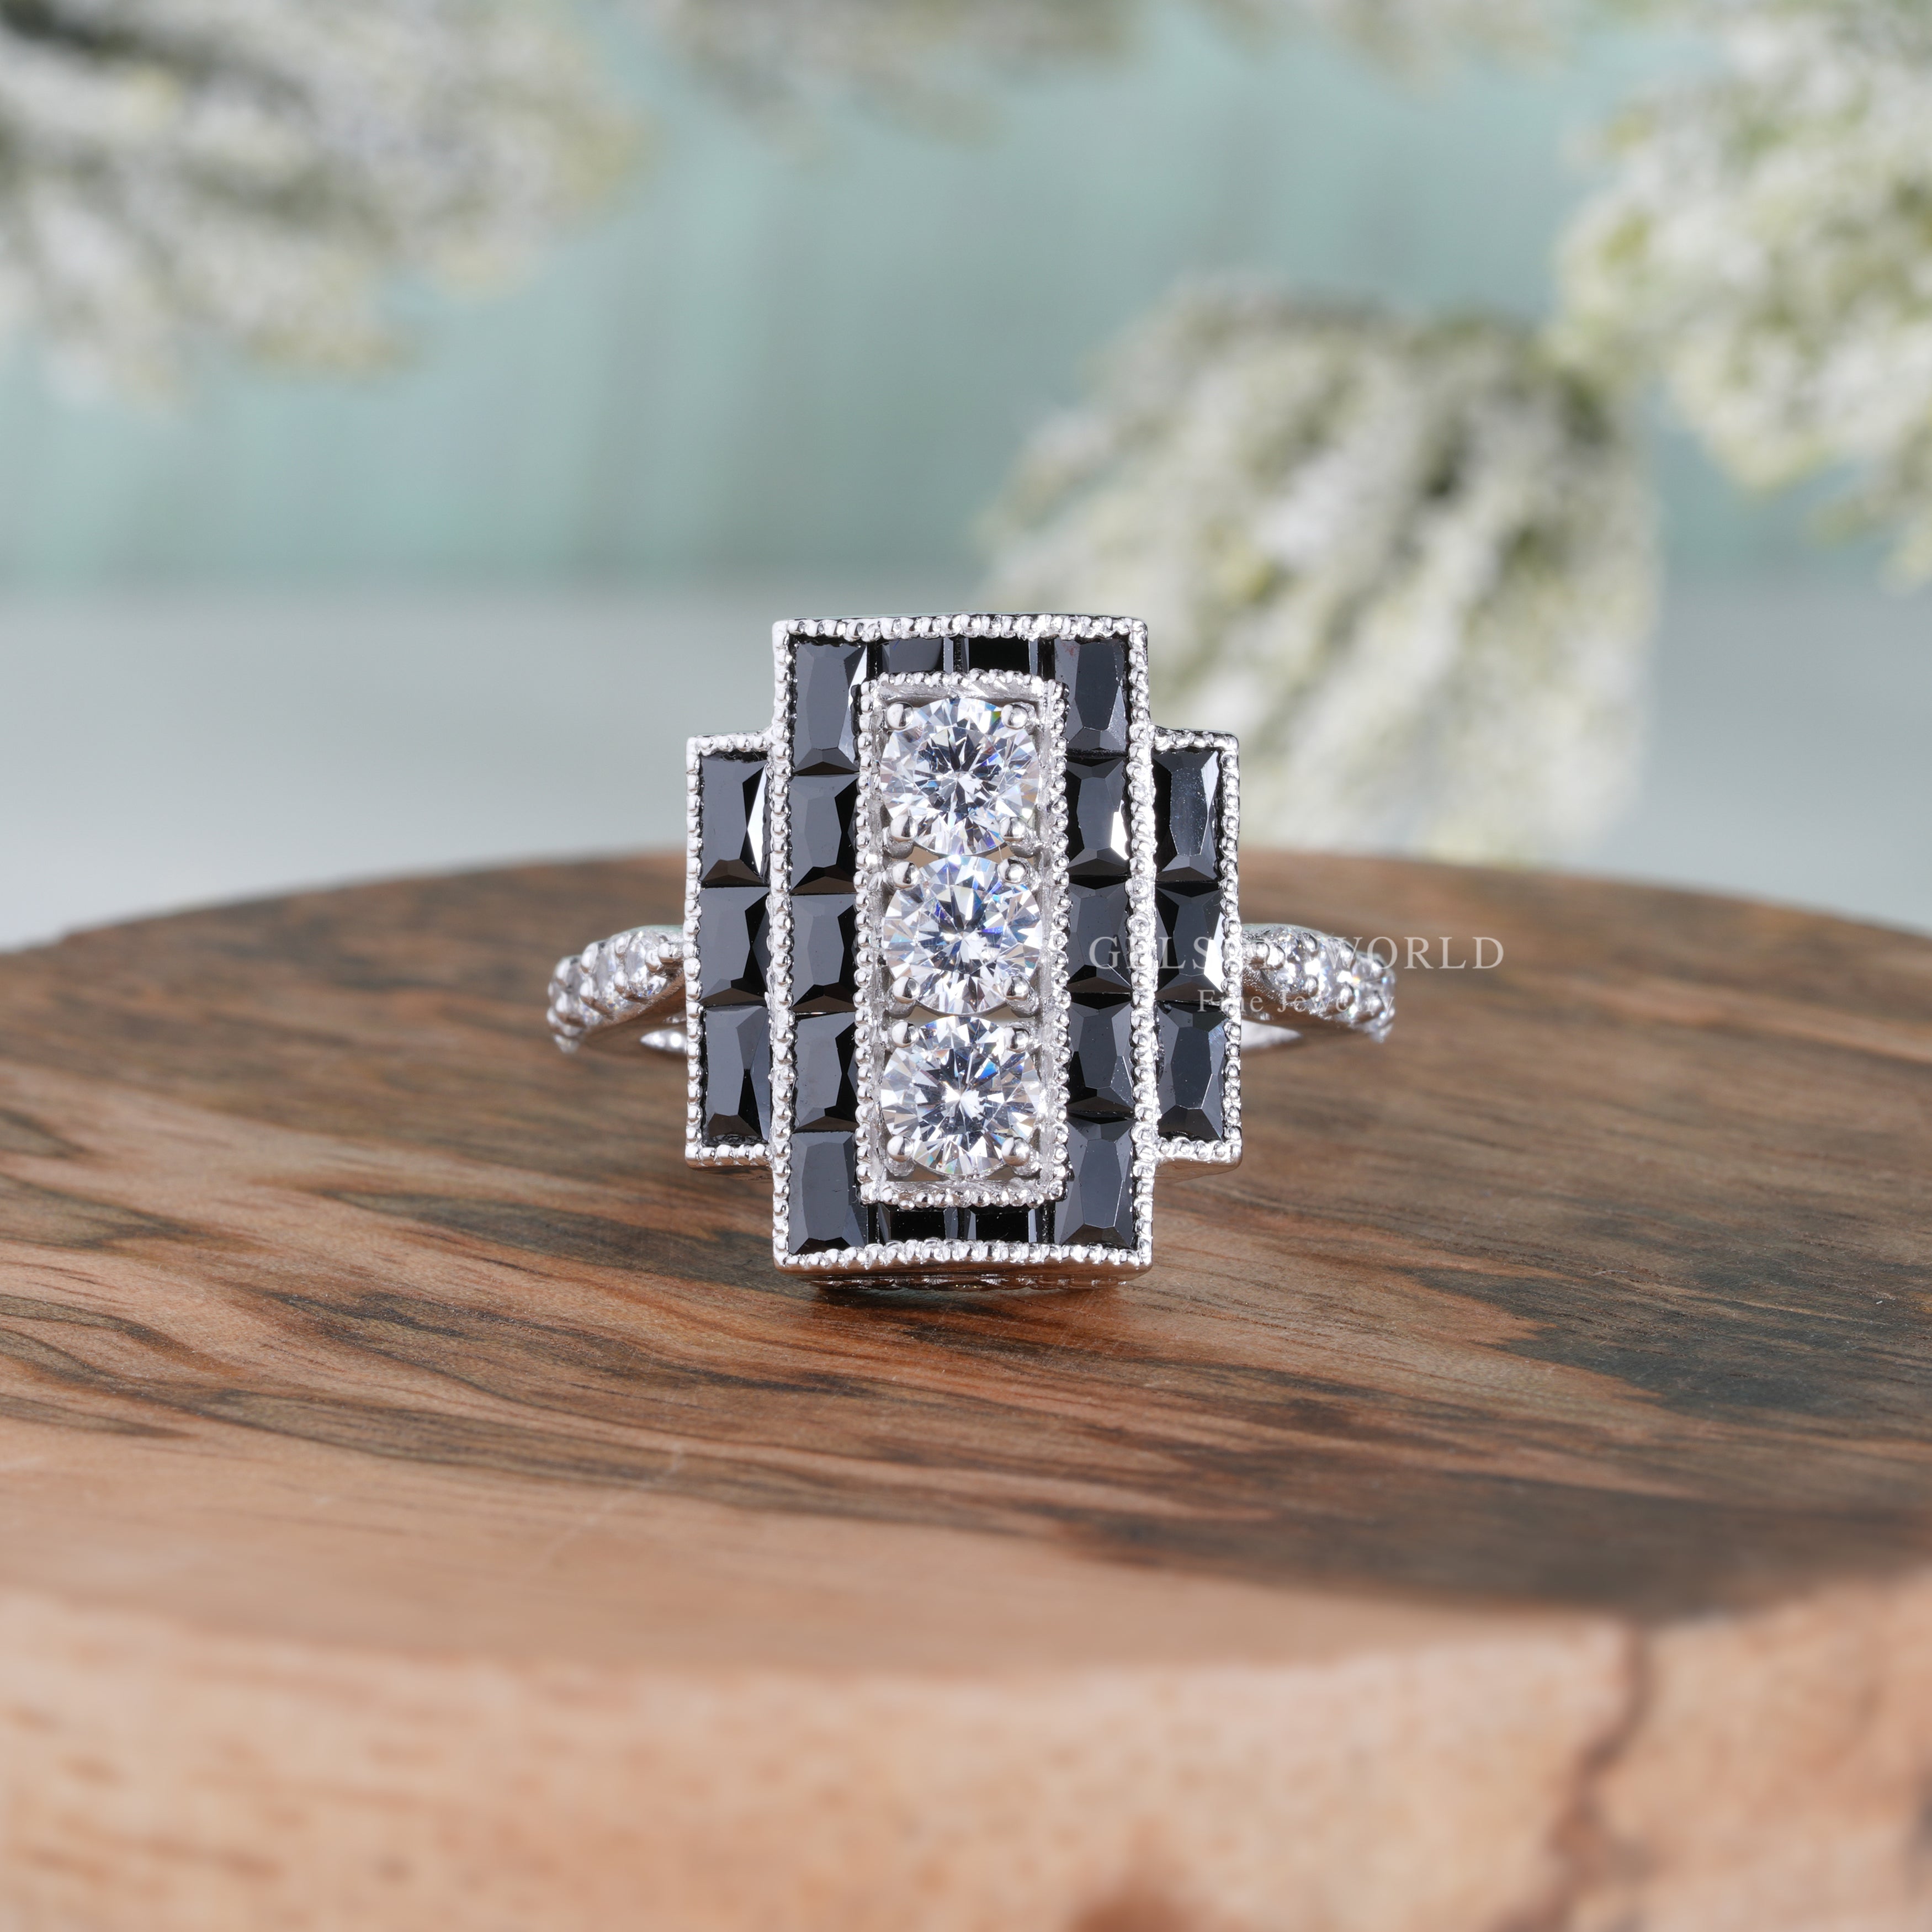 Antique Engagement Rings, Estate Jewelry Rings